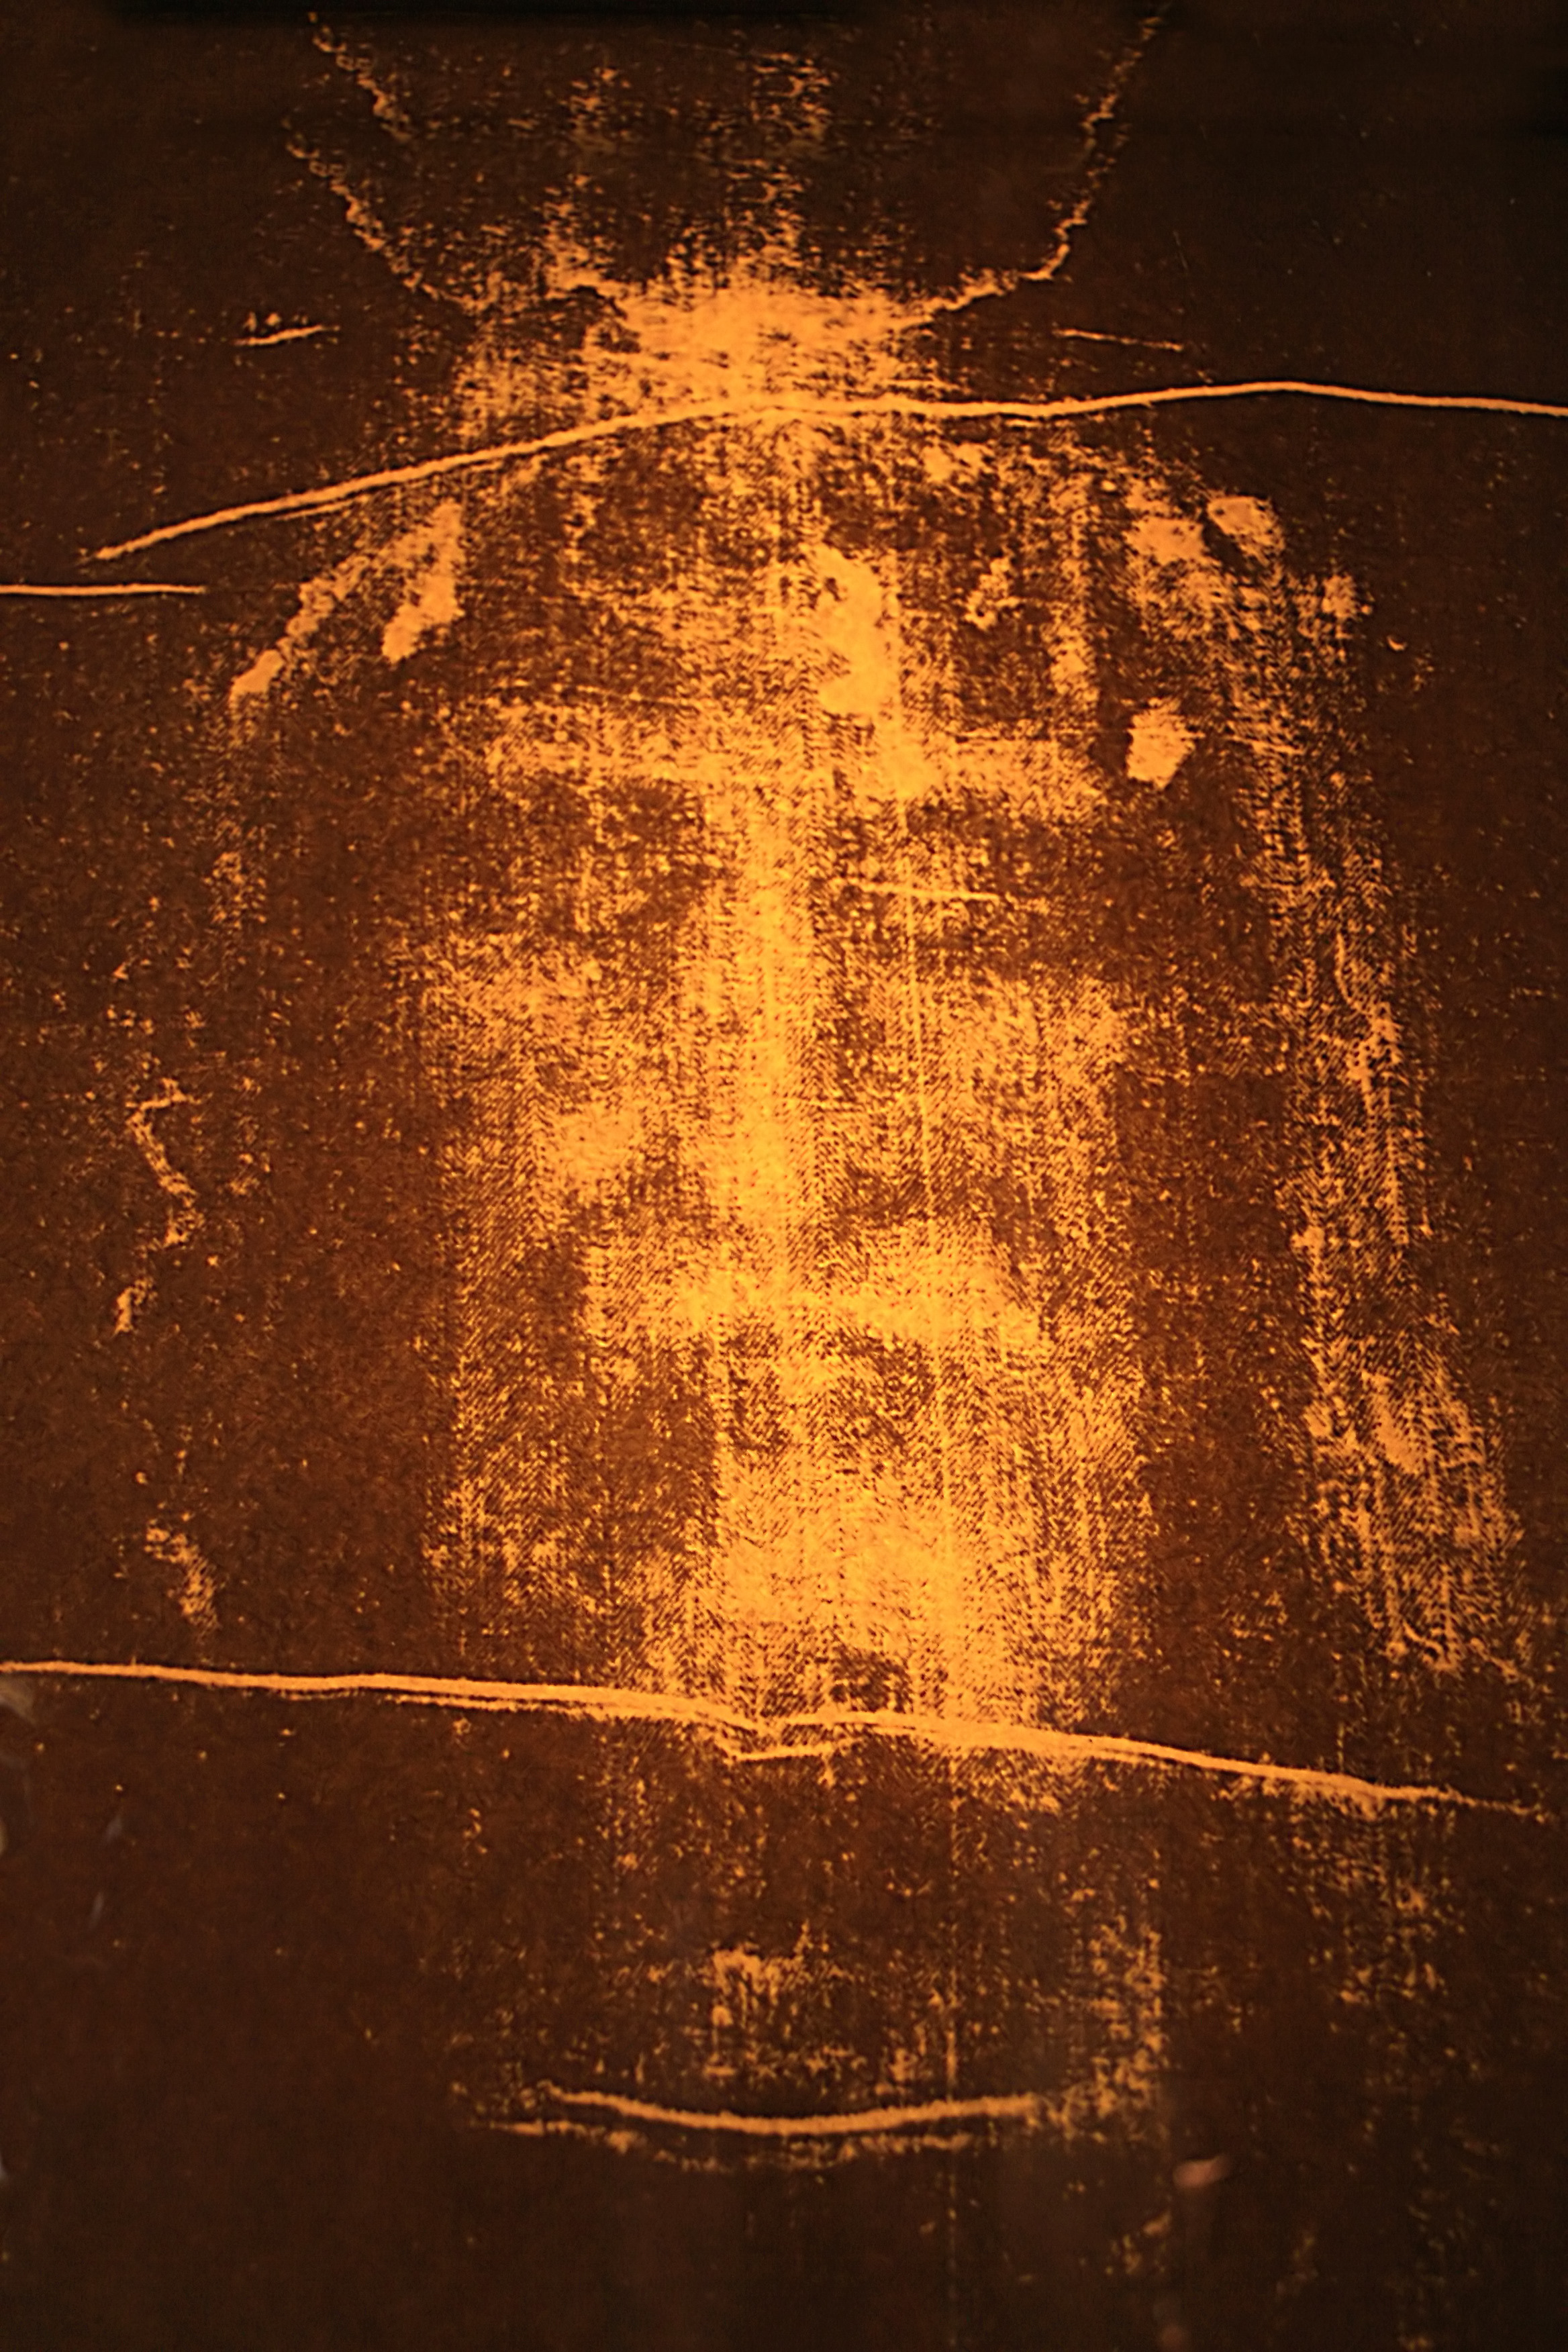 The Drew Mariani Show - Uncovering the Shroud: A Former Skeptic's Encounter with the Burial Cloth of Jesus